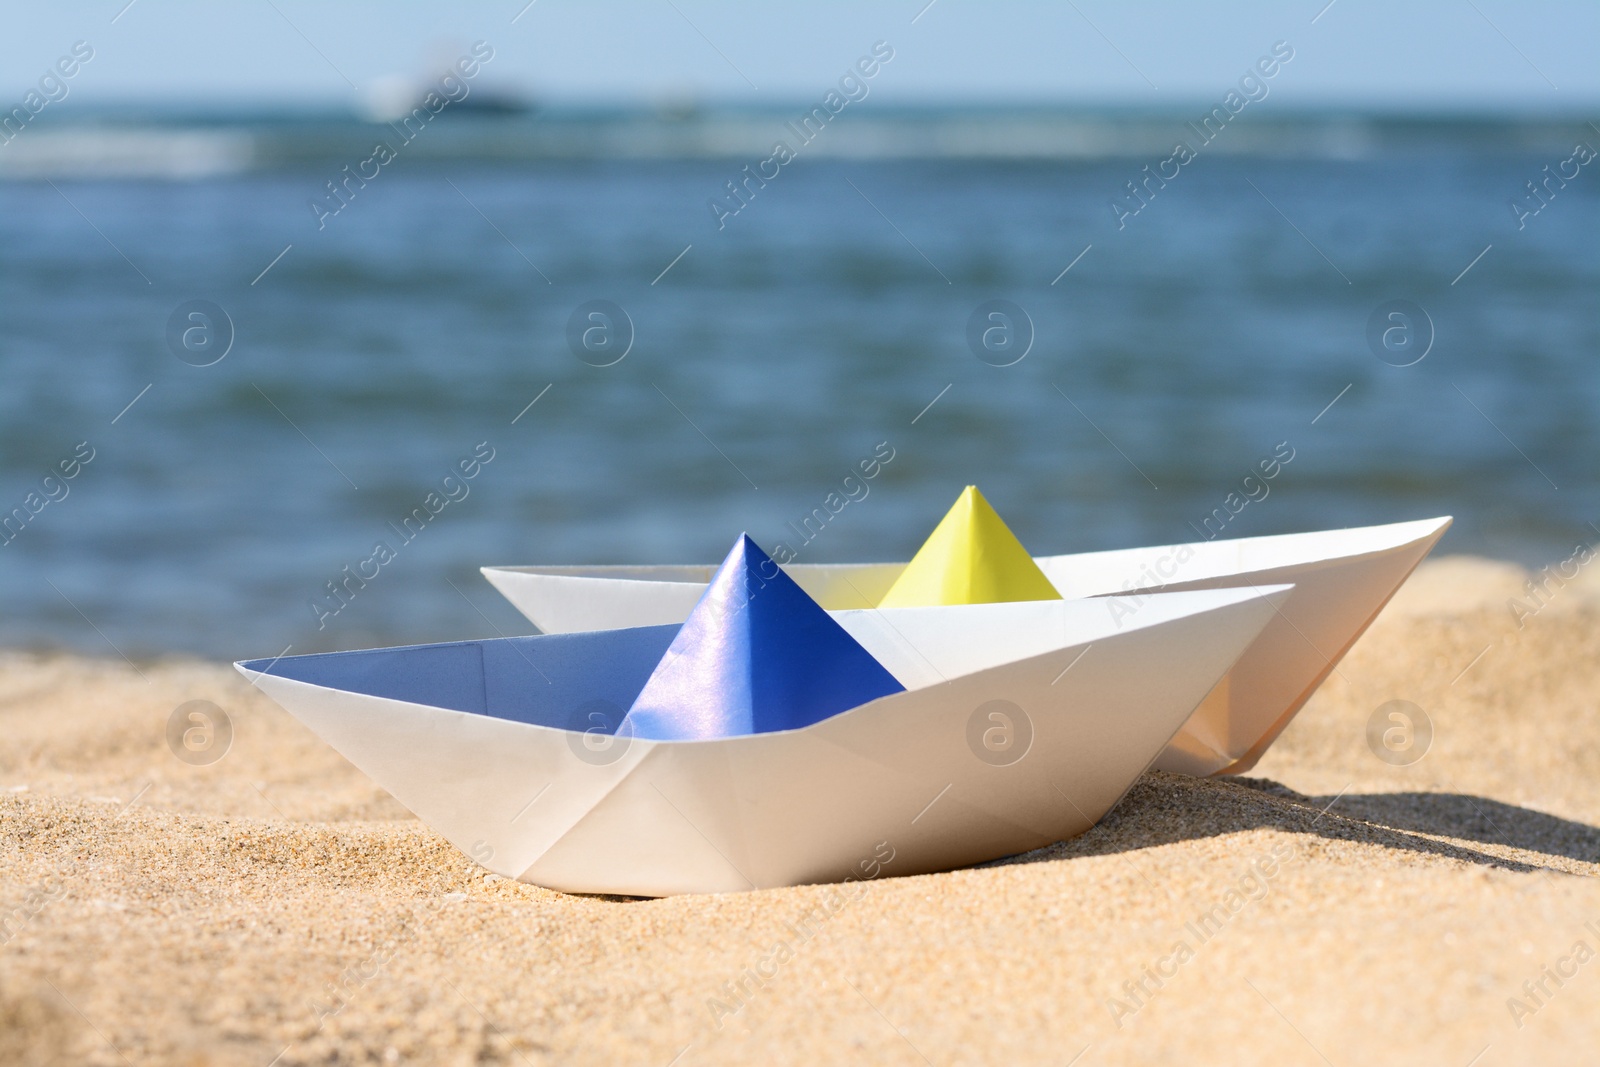 Photo of Two paper boats near sea on sunny day, closeup